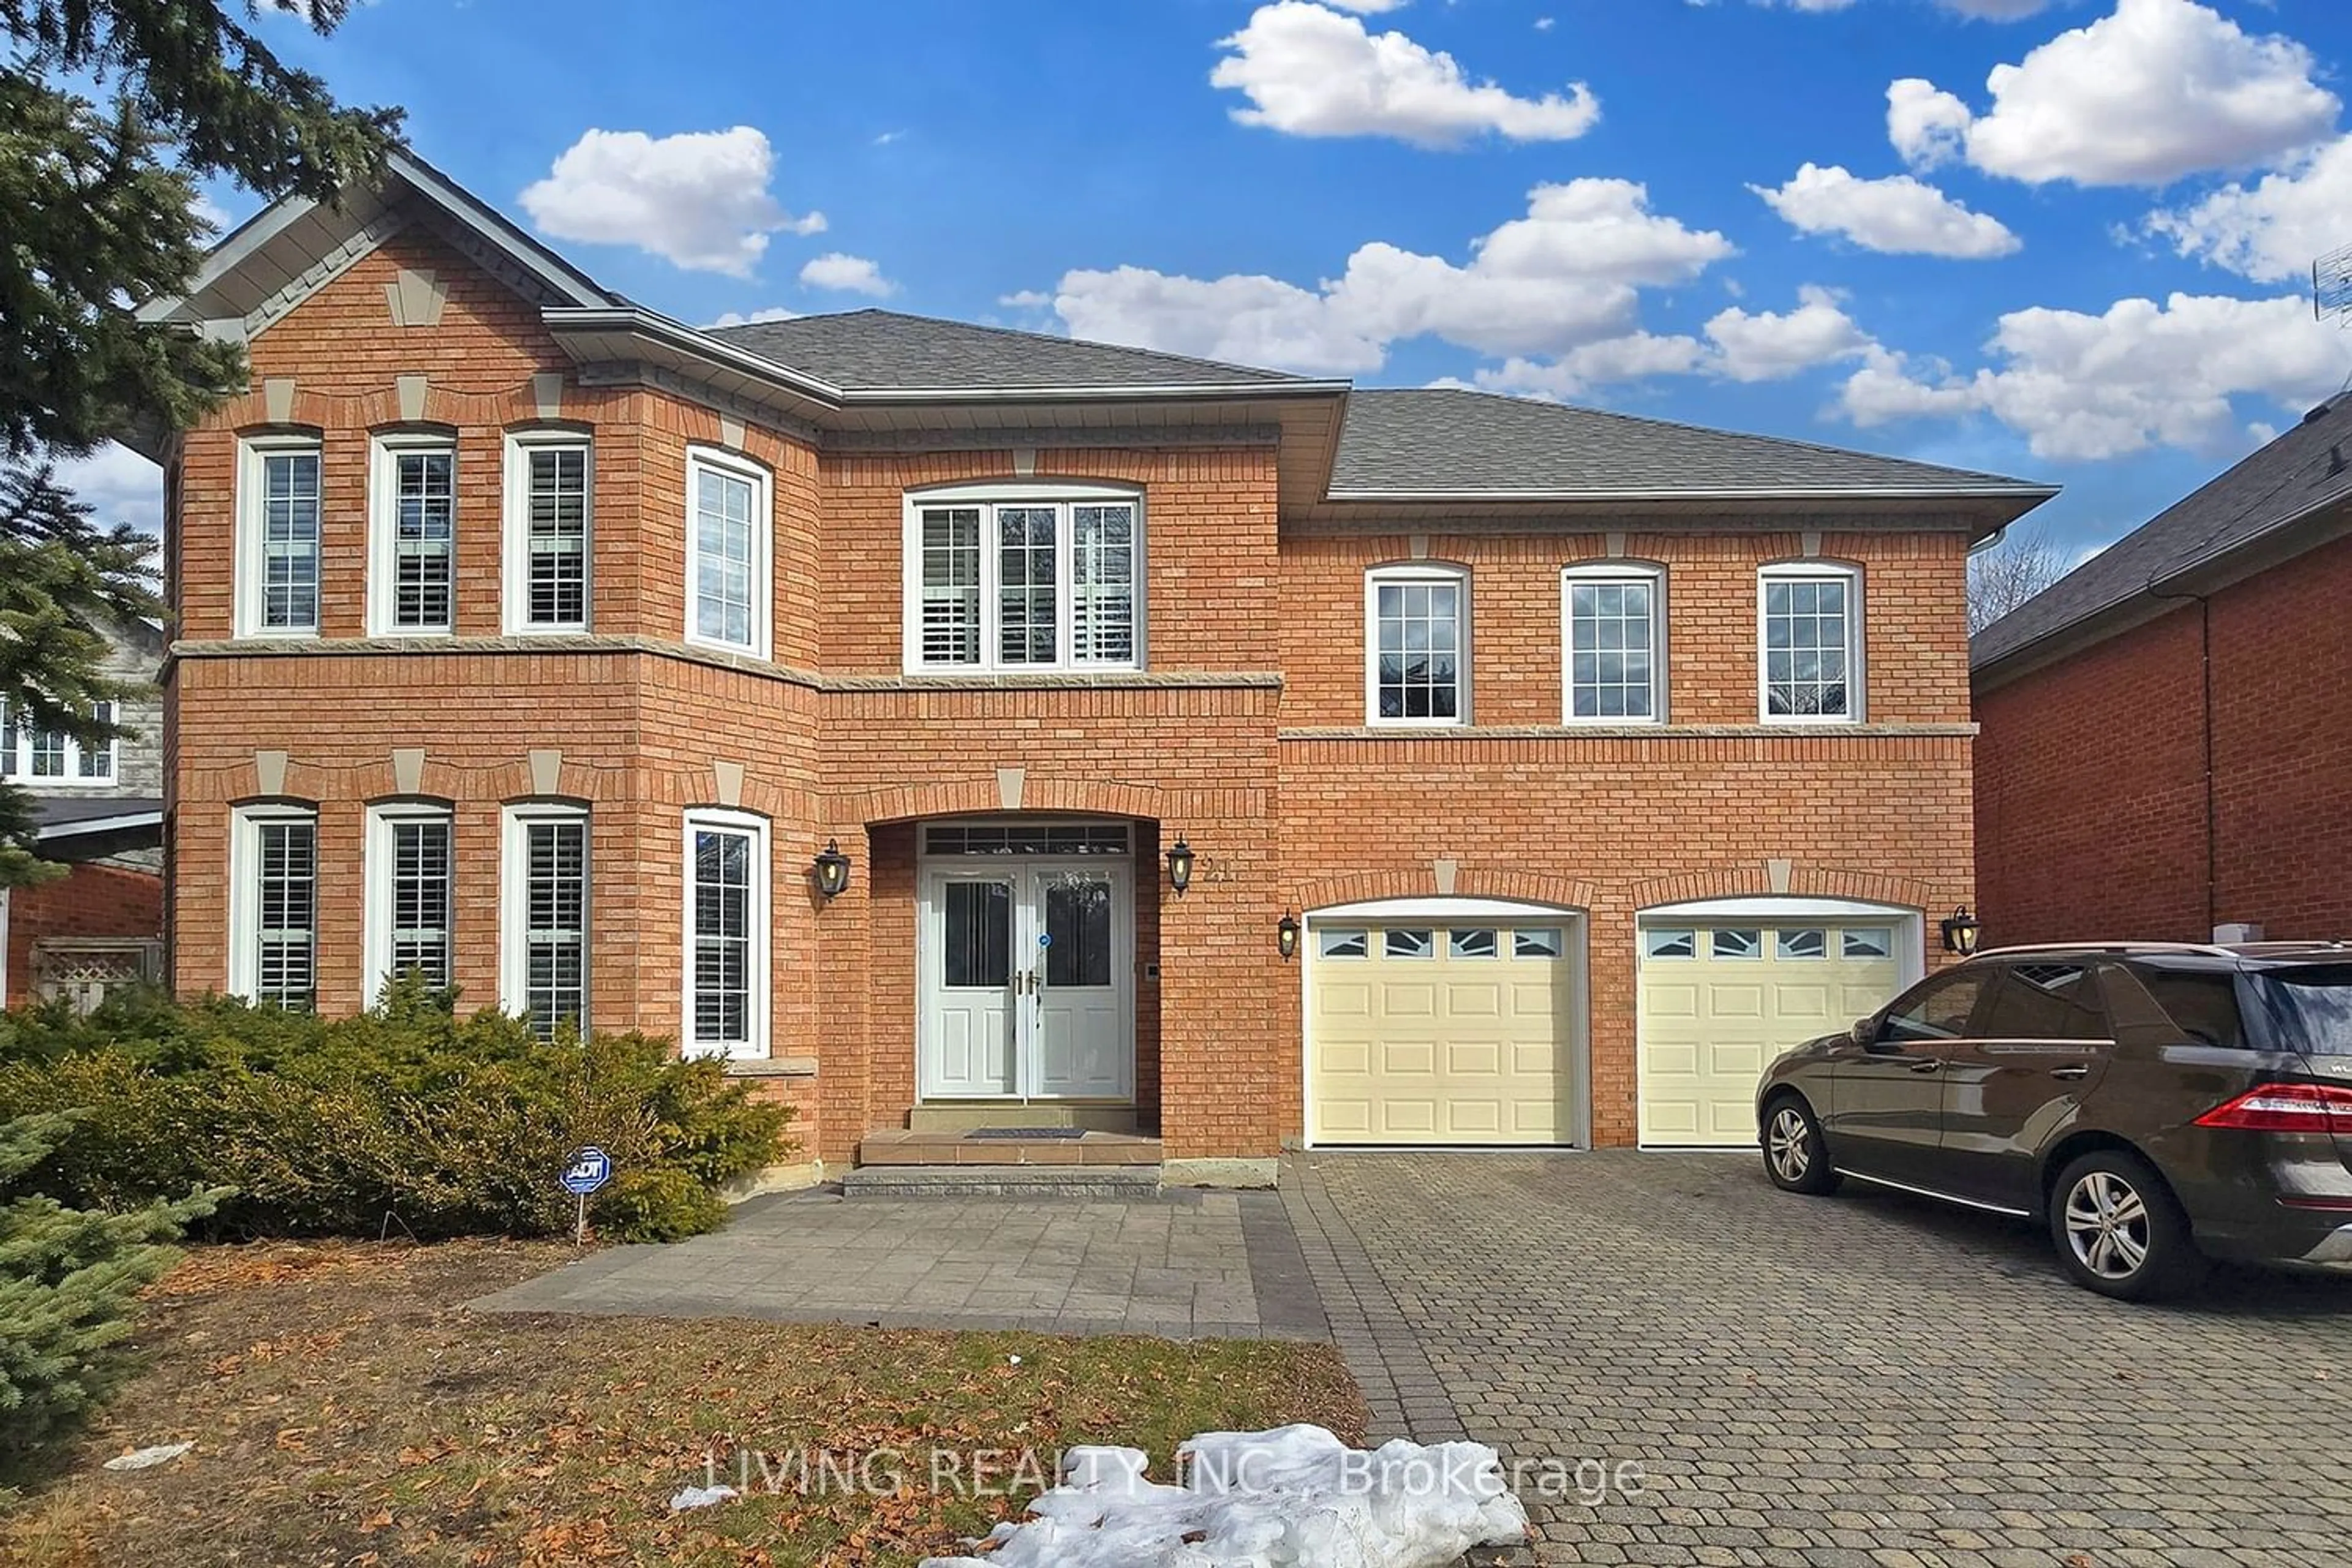 Home with brick exterior material for 21 Forest Hill Dr, Richmond Hill Ontario L4B 3C1